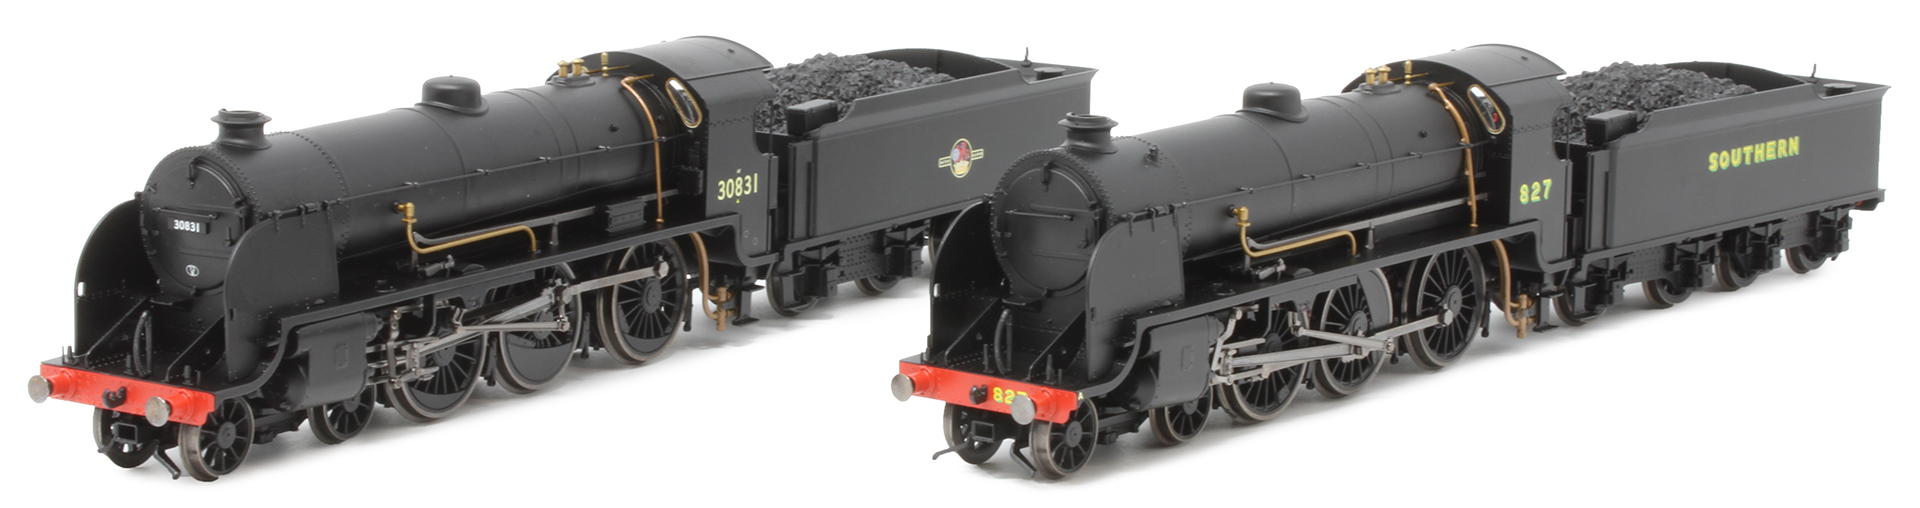 Hornby OO Gauge (1:76 Scale) 4-6-0 Class S15 LSWR